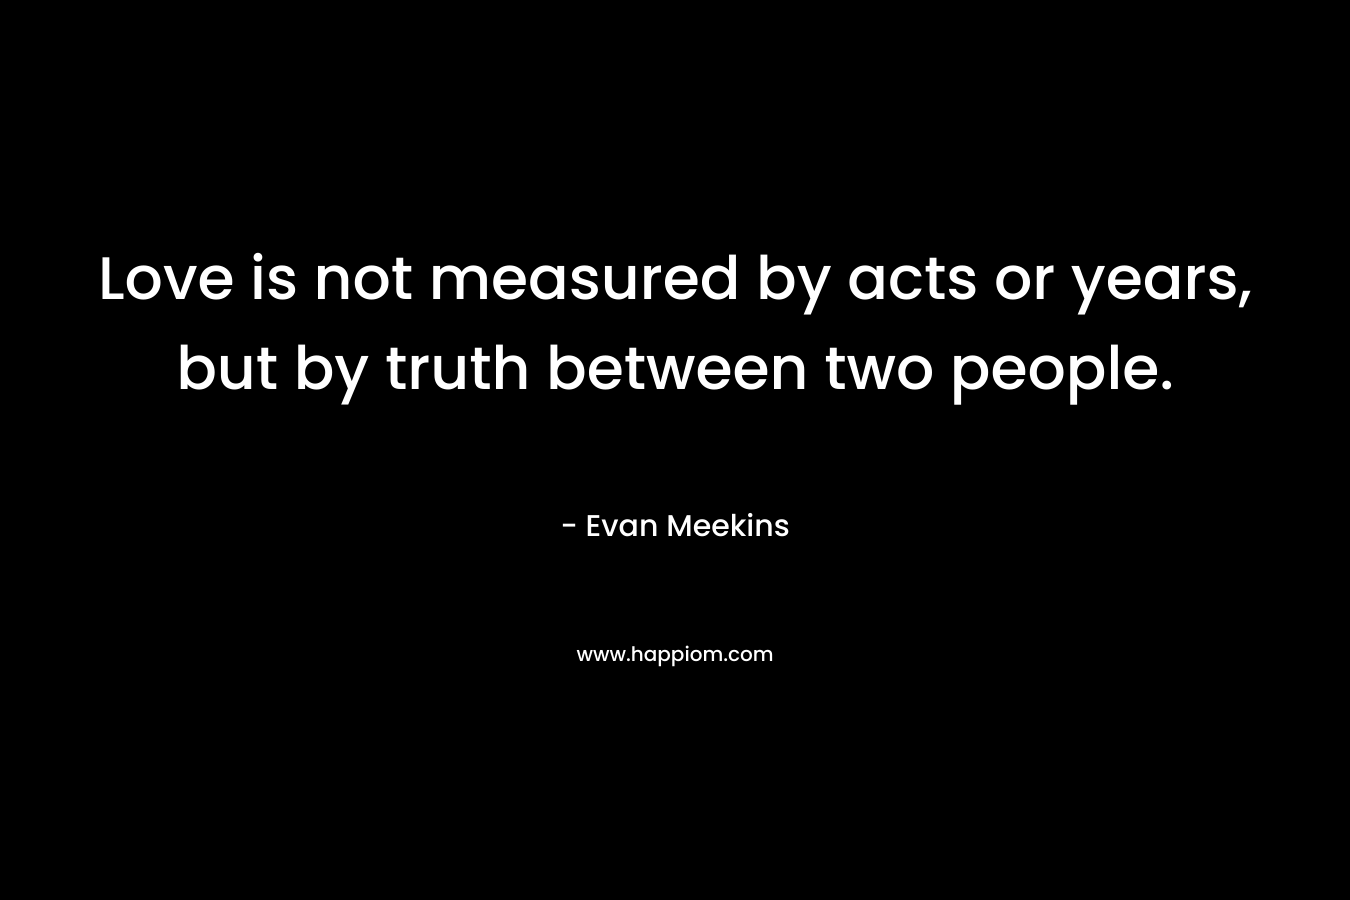 Love is not measured by acts or years, but by truth between two people.